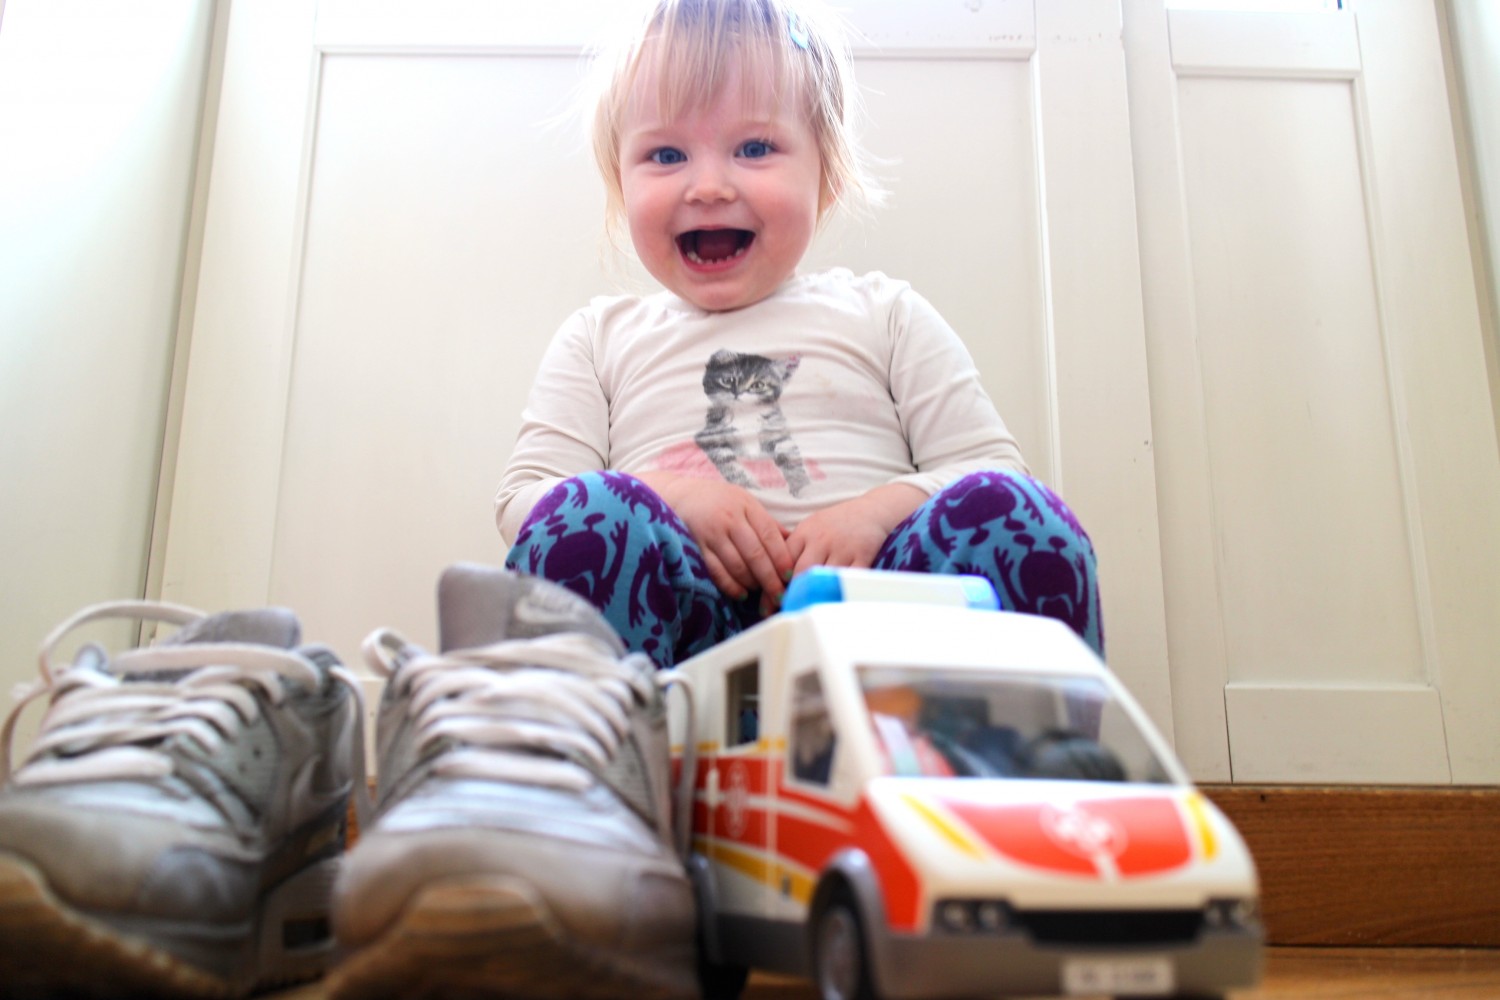 and with daddy`s sneakers, in Cubuskids body and Vossatassar tights with her favourite Playmobil "babu" car!